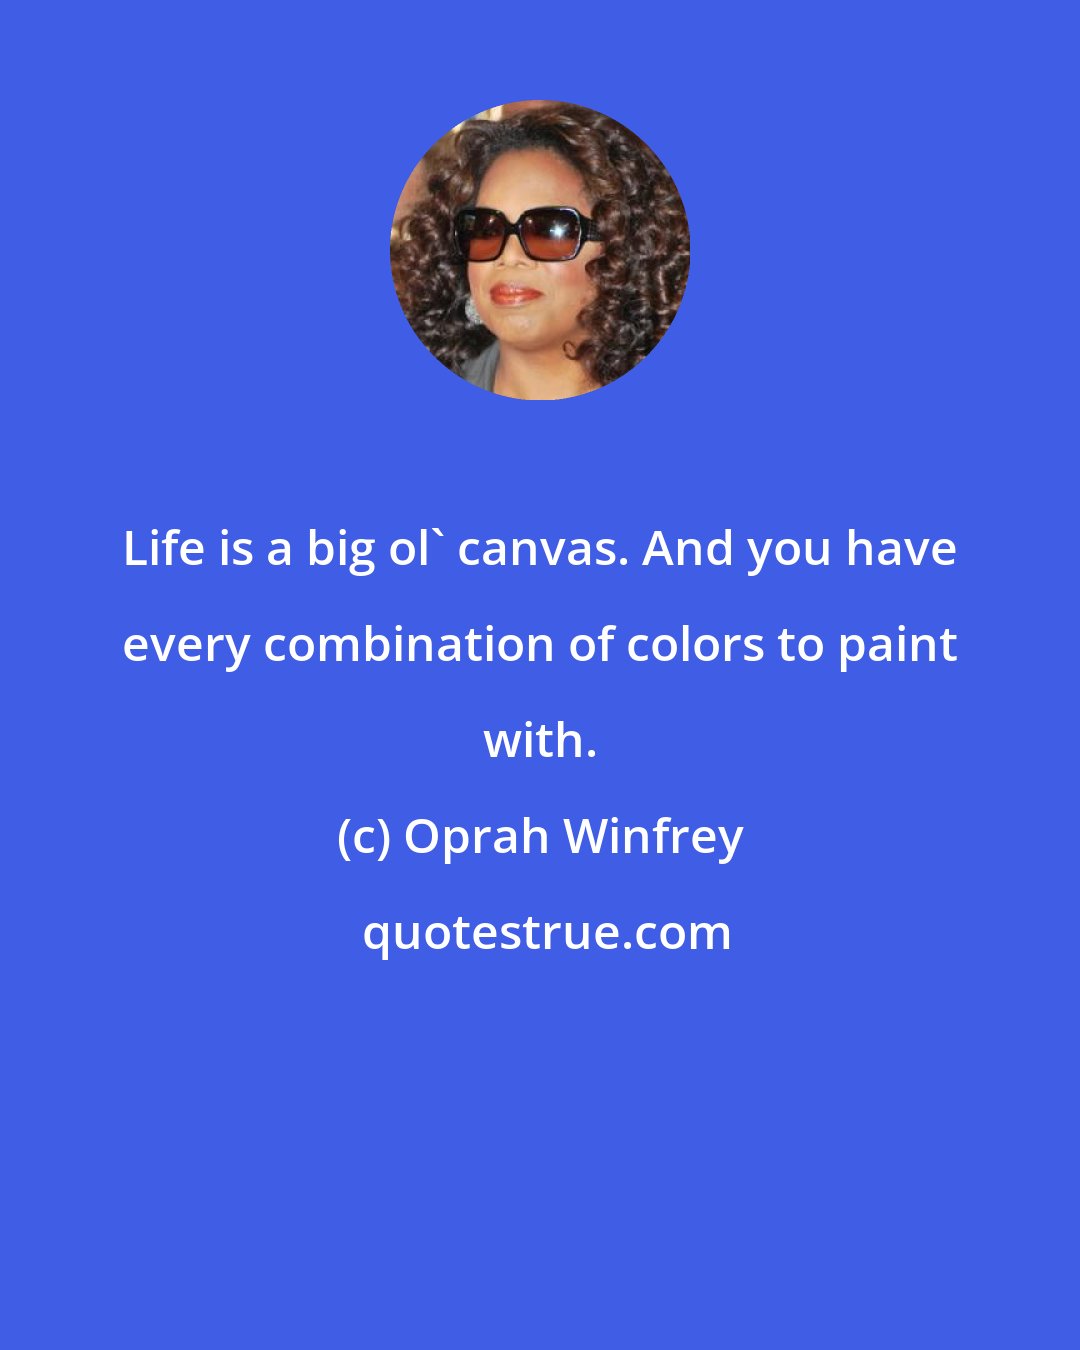 Oprah Winfrey: Life is a big ol' canvas. And you have every combination of colors to paint with.